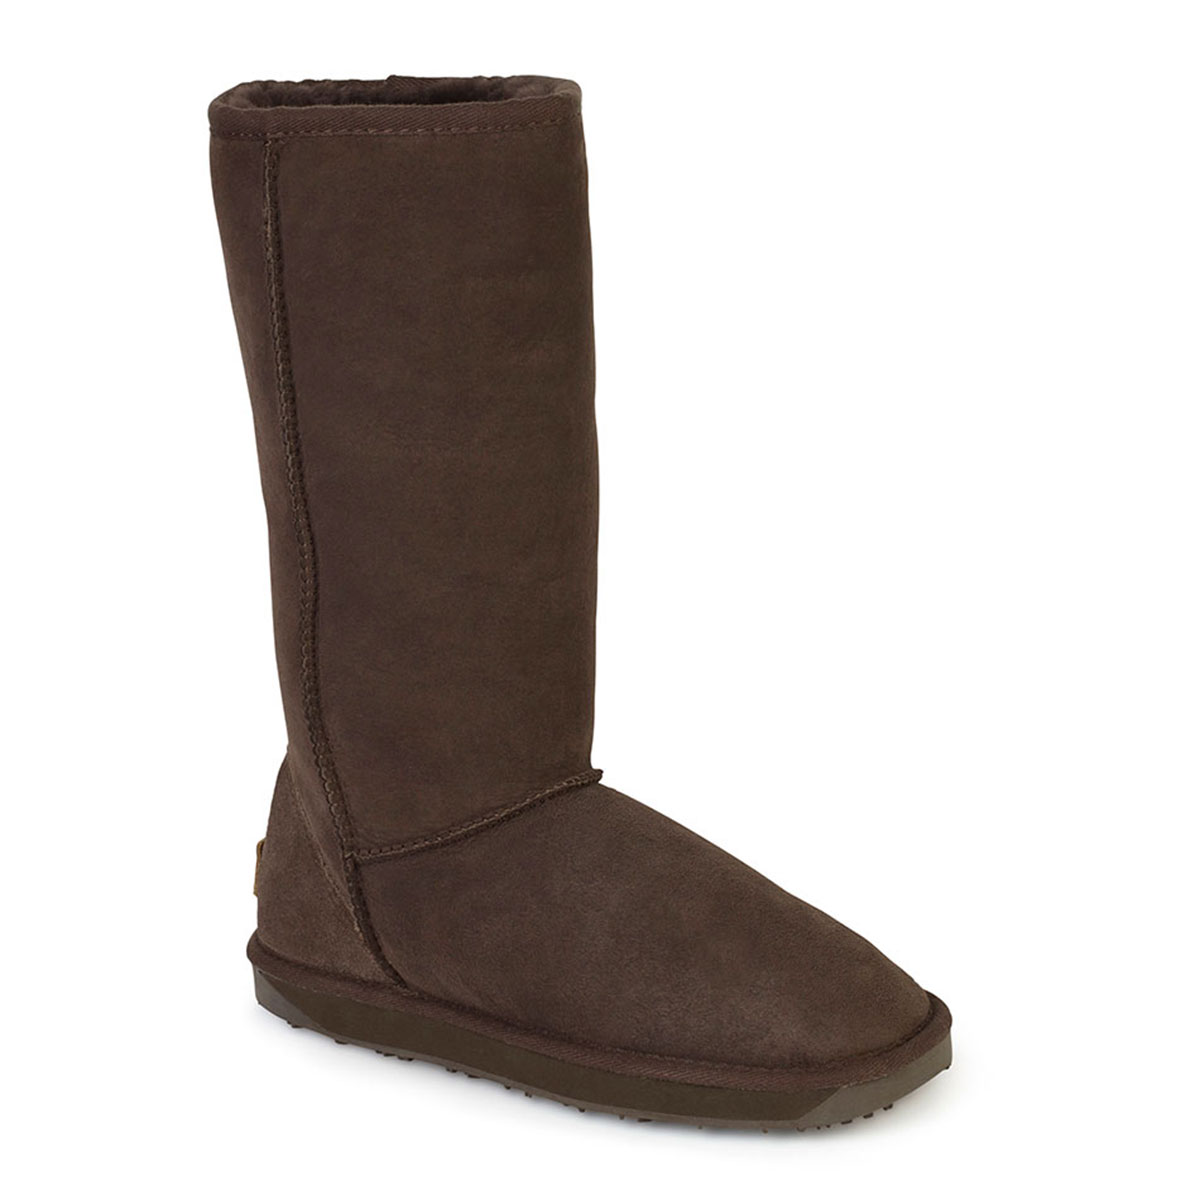 Ladies Tall Classic Sheepskin Boots | Just Sheepskin Slippers and Boots